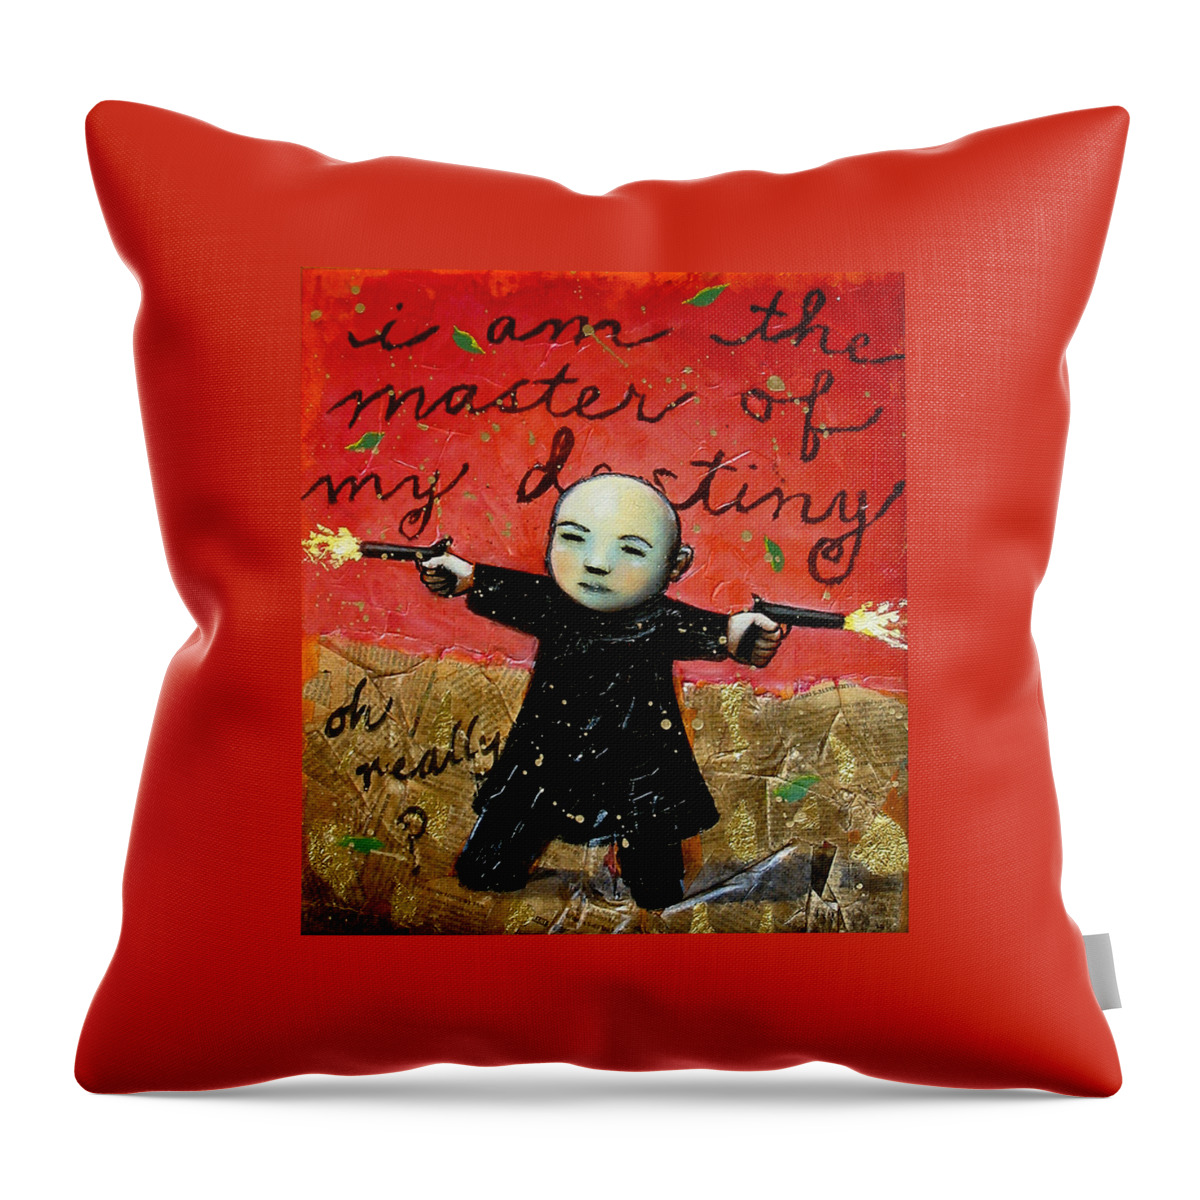 Funny Throw Pillow featuring the painting I Am the Master of My Destiny by Pauline Lim